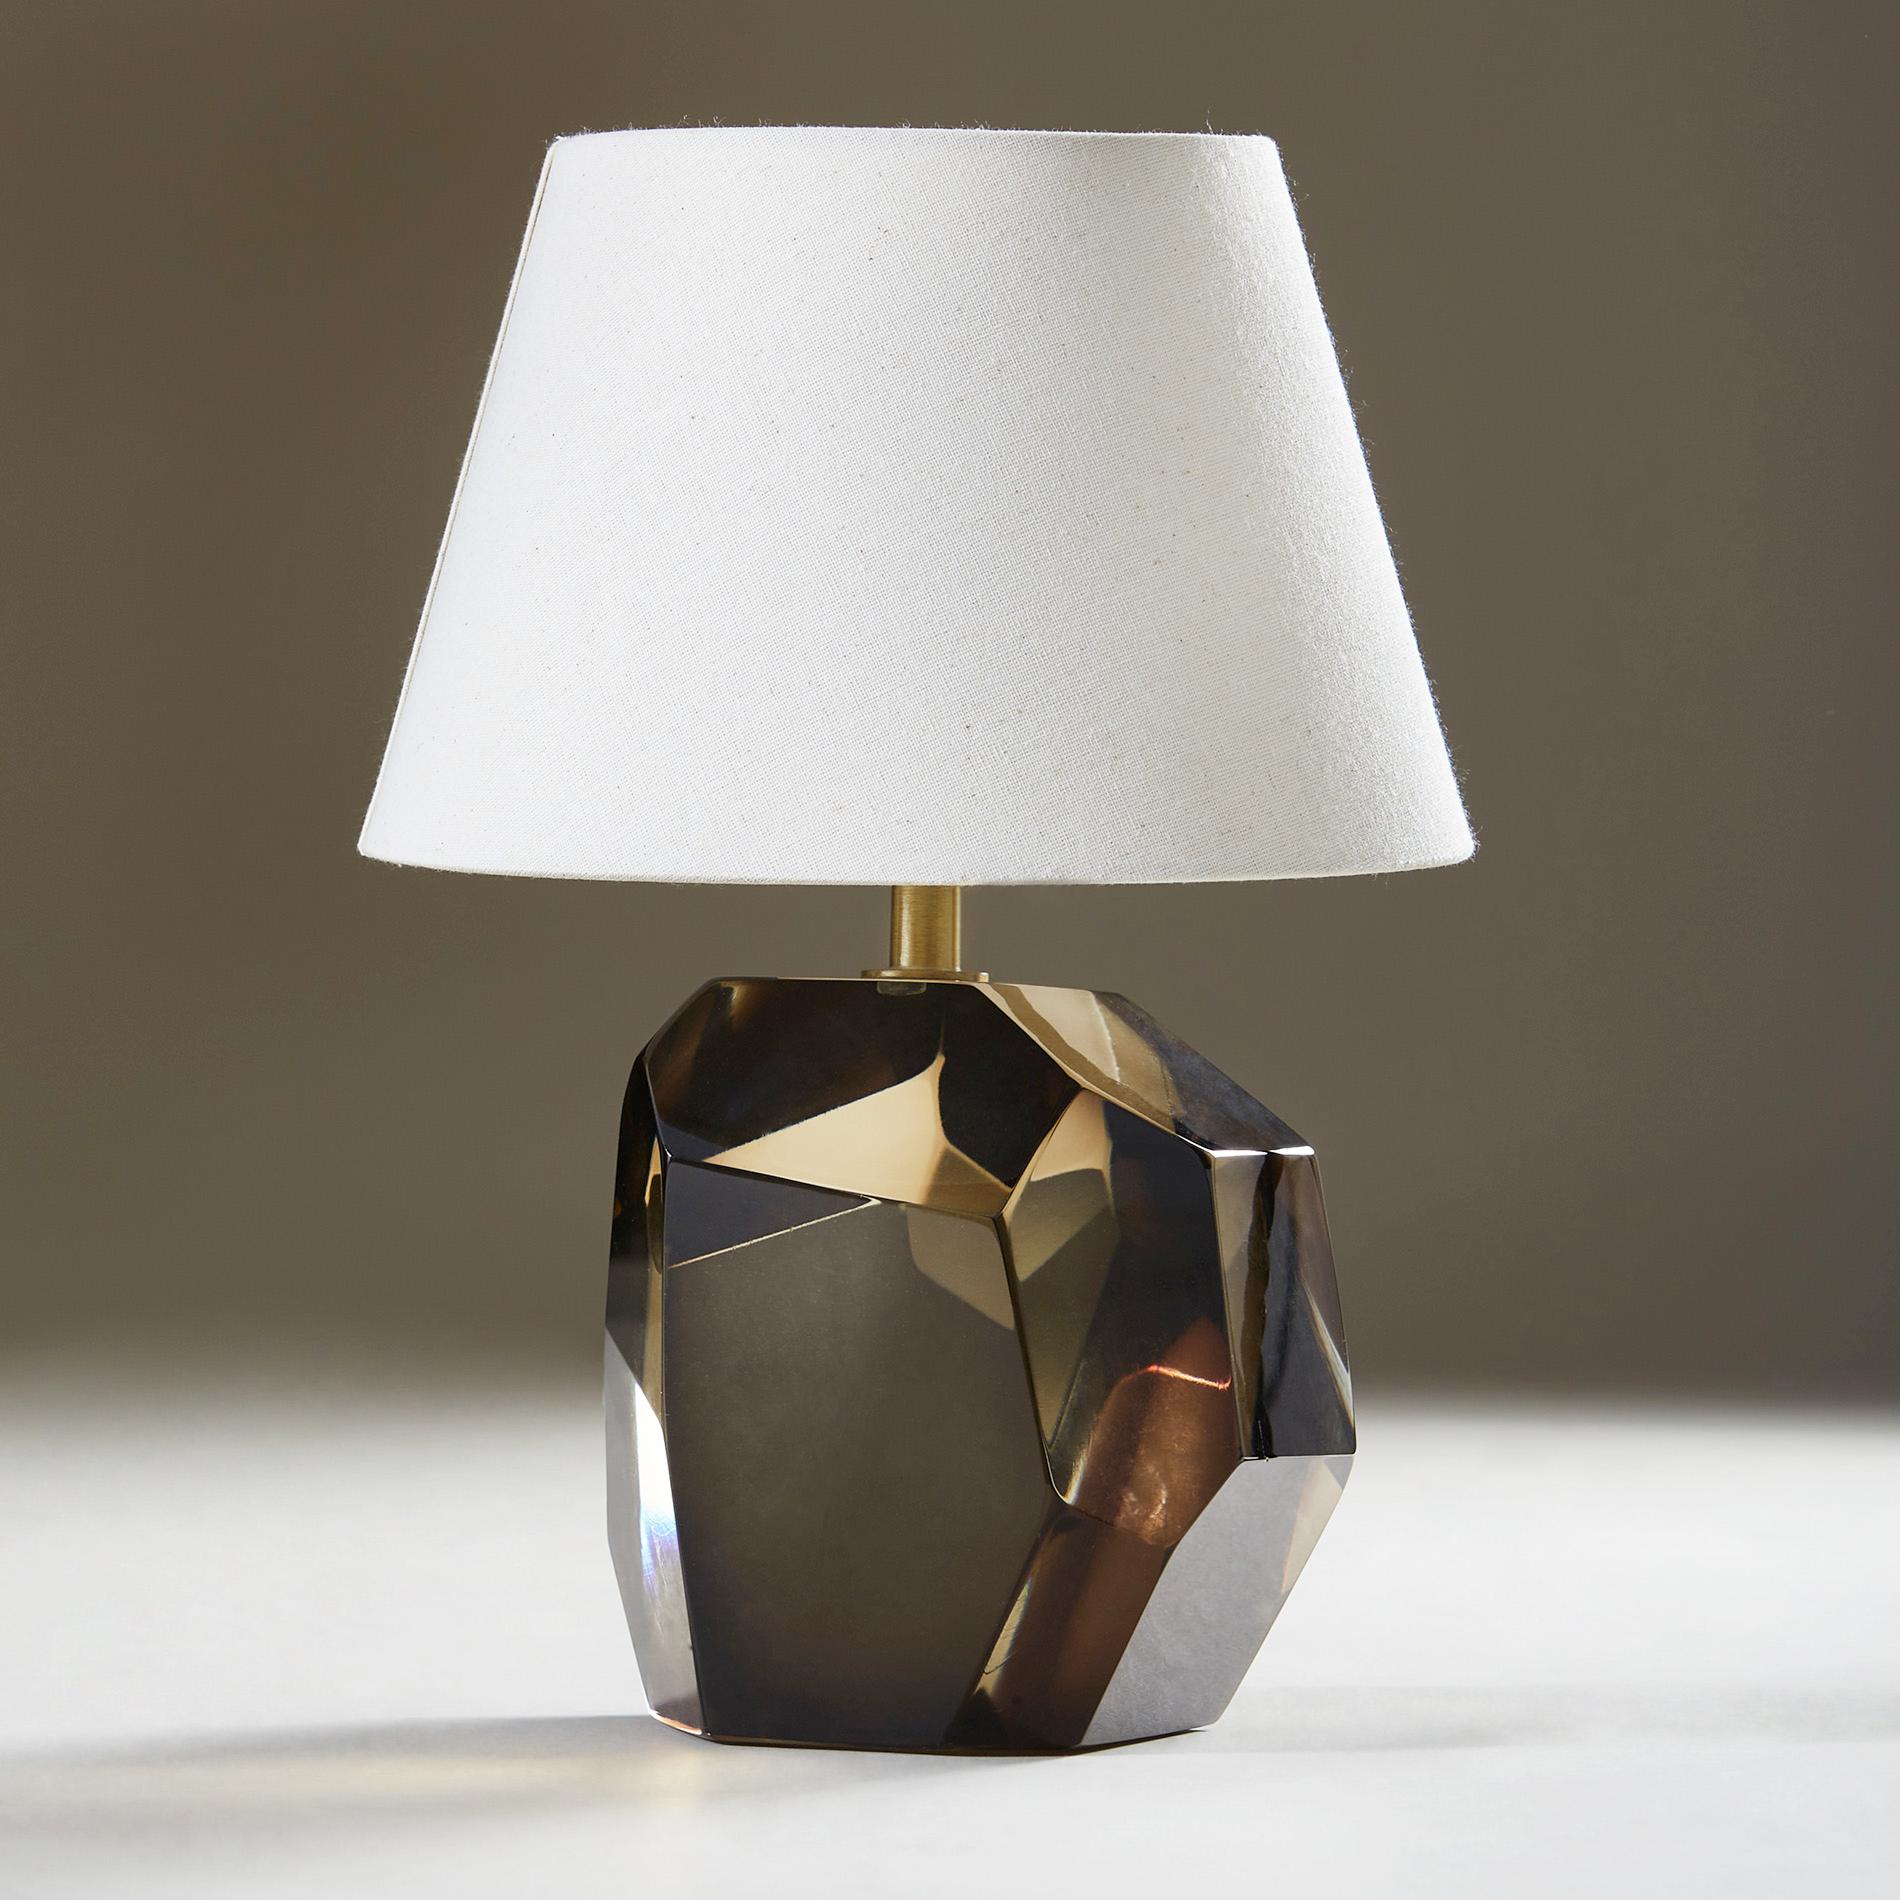 Contemporary handcrafted and hand-polished heavy solid Murano 'rock' lamp with brass fitting. Includes US hand dimmer switch.

Signed 'Murano'.

Also available in emerald, citrine, turquoise, amber and clear.

4 Week lead-time if not in stock.